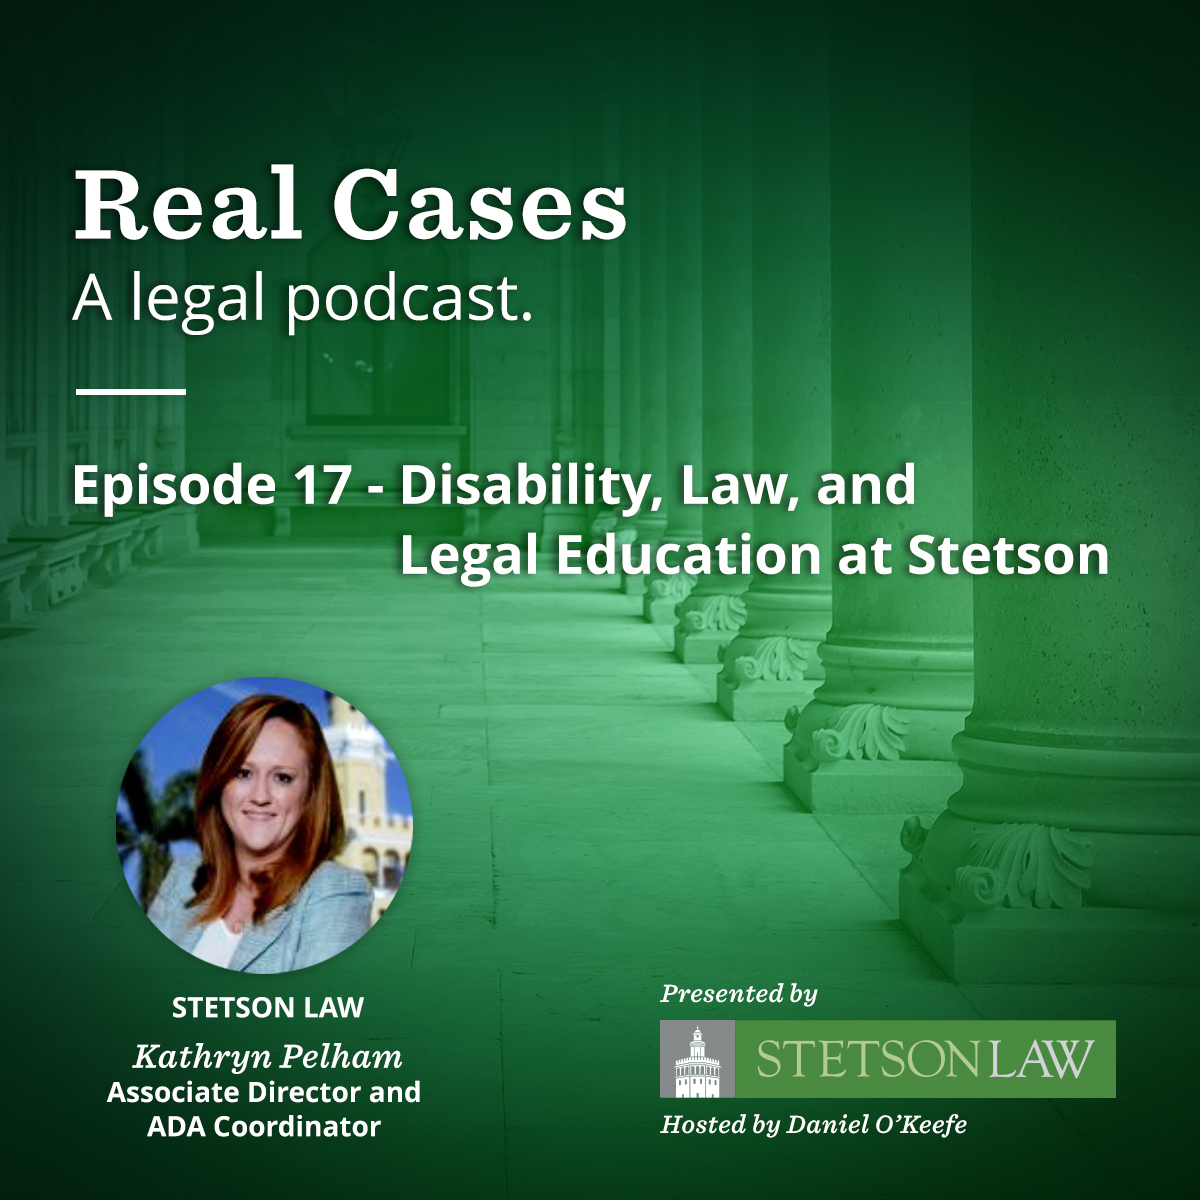 Real Cases - a legal podcast. Episode 17 - Disability, Law, and Legal Education at Stetson - Kathryn Pelham